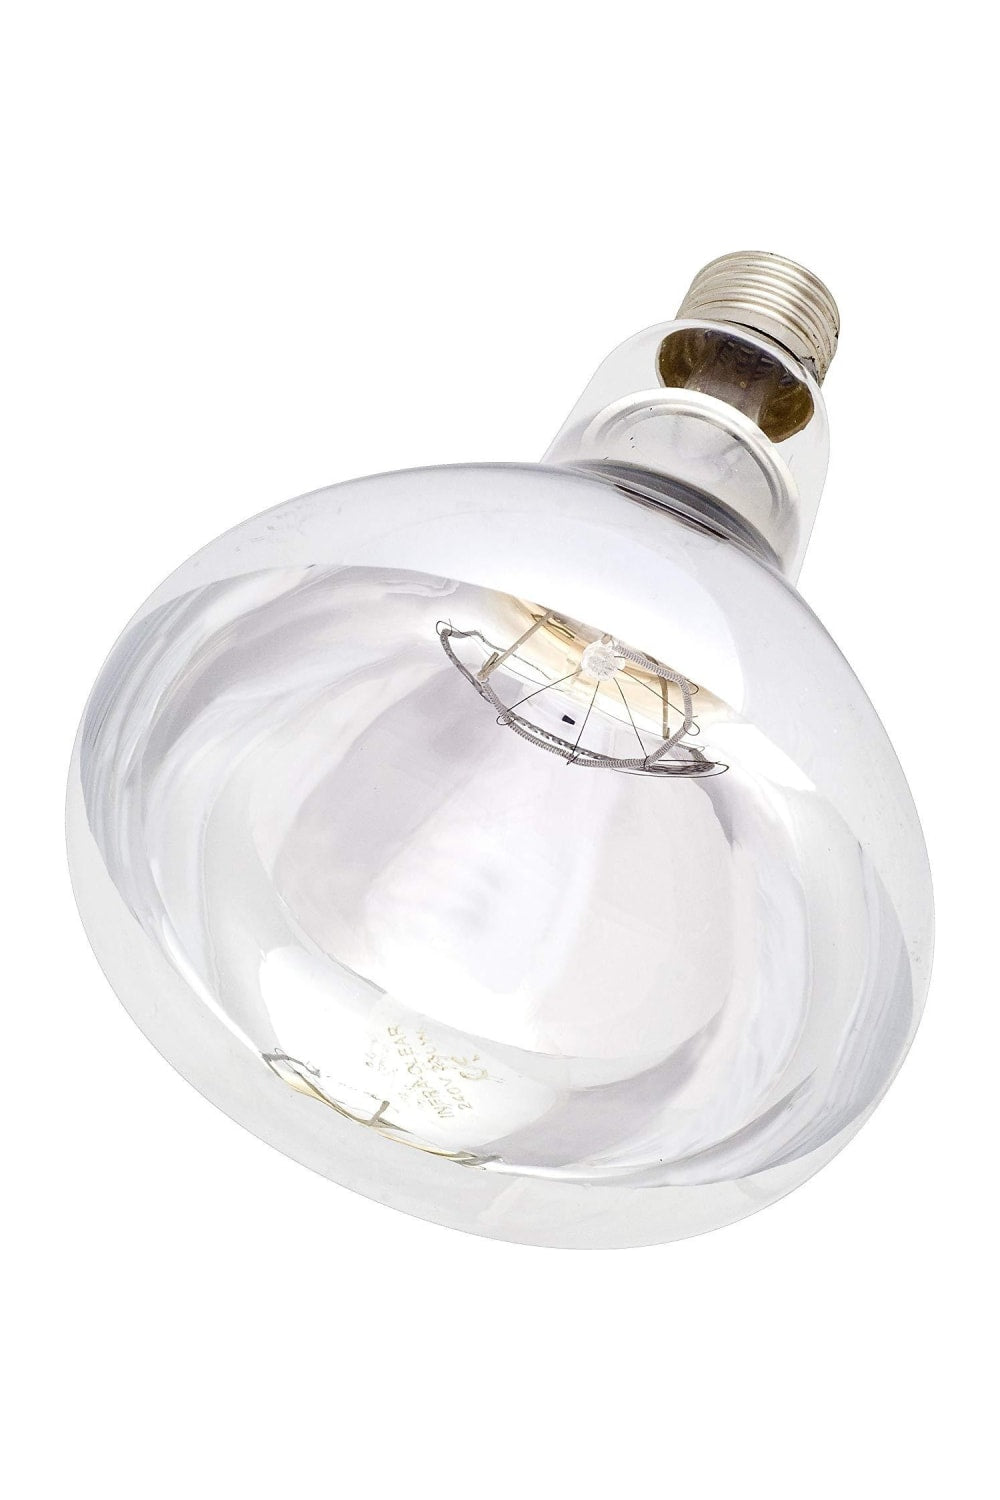 Tusk Intelec Infra-Red Bulb (Clear) (250w)